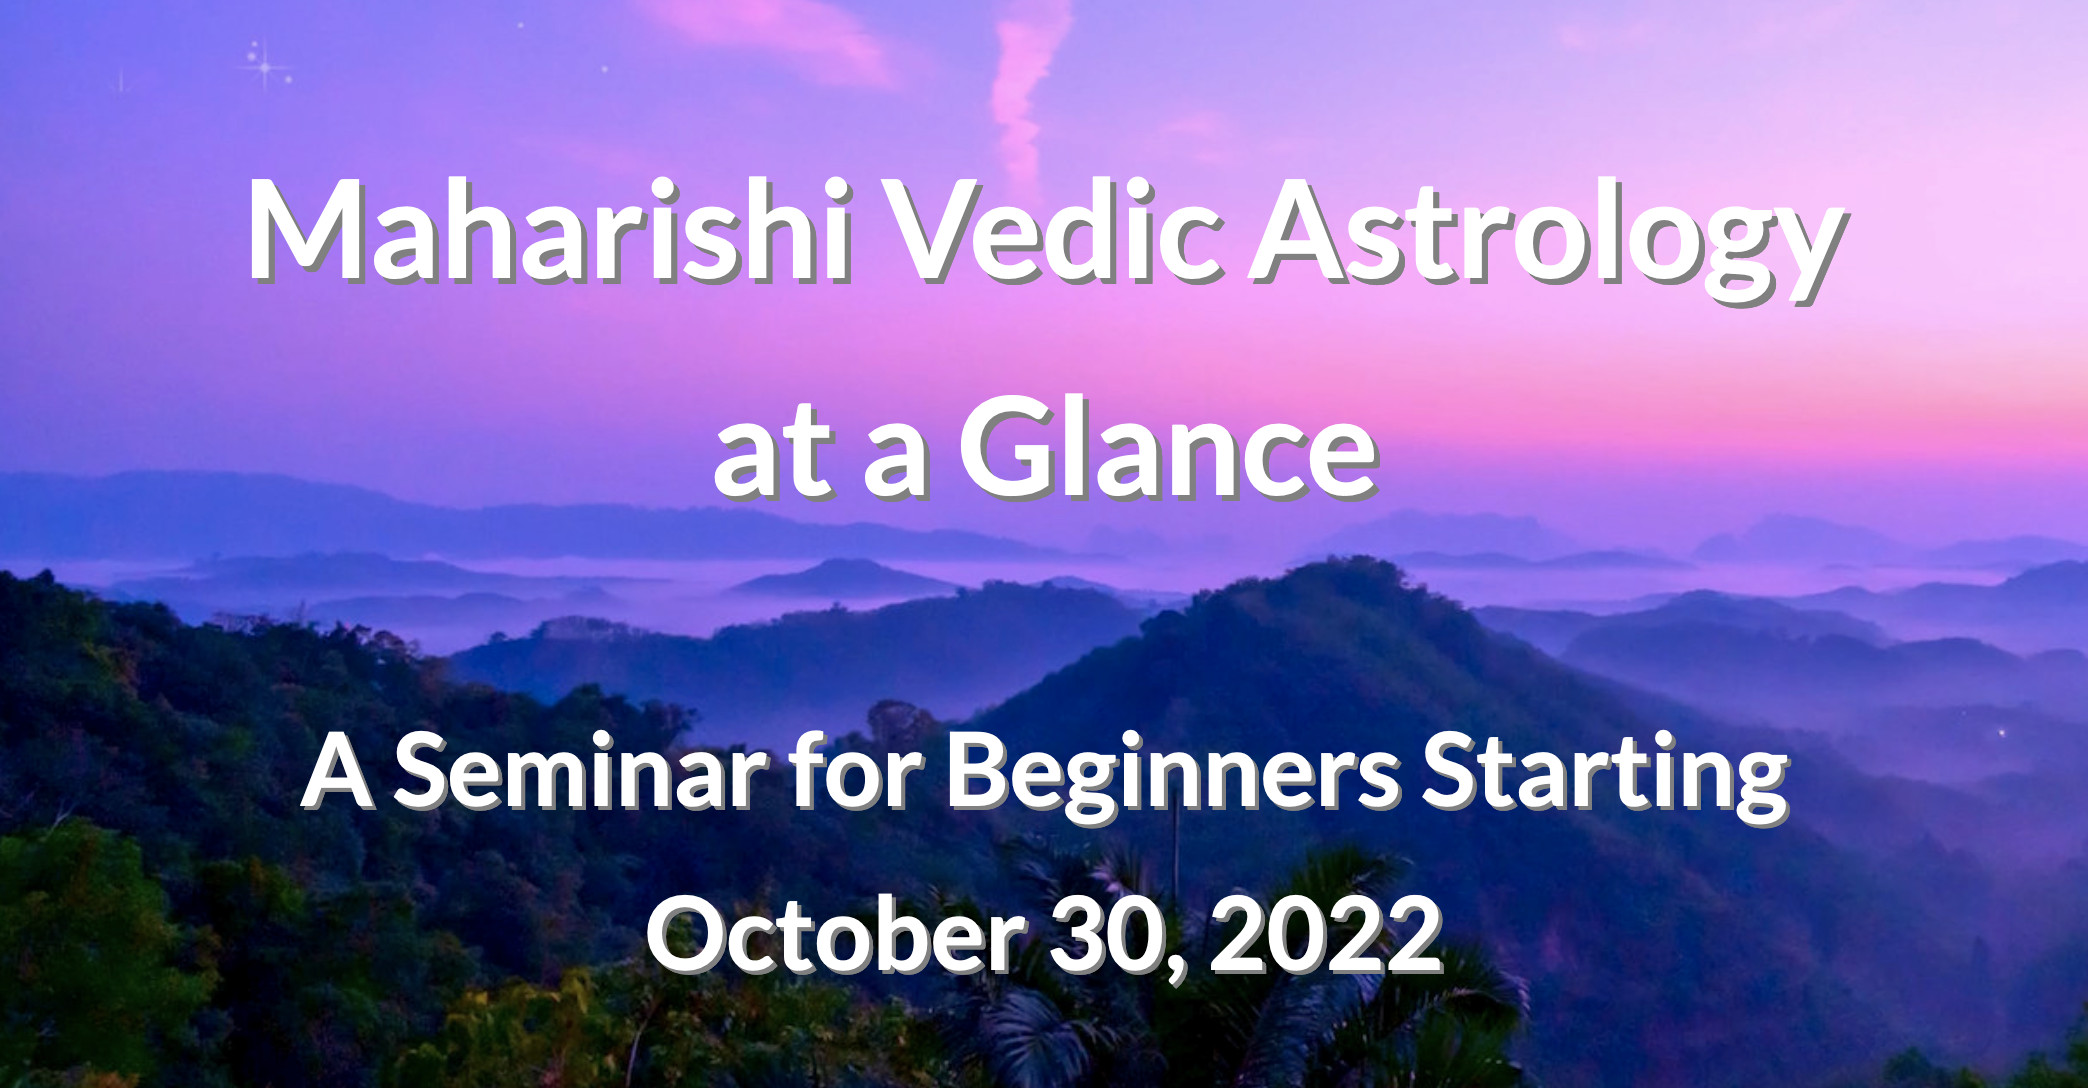 Maharishi Vedic Astrology at a Glance: A Seminar for Beginners, Starting October 30, 2022